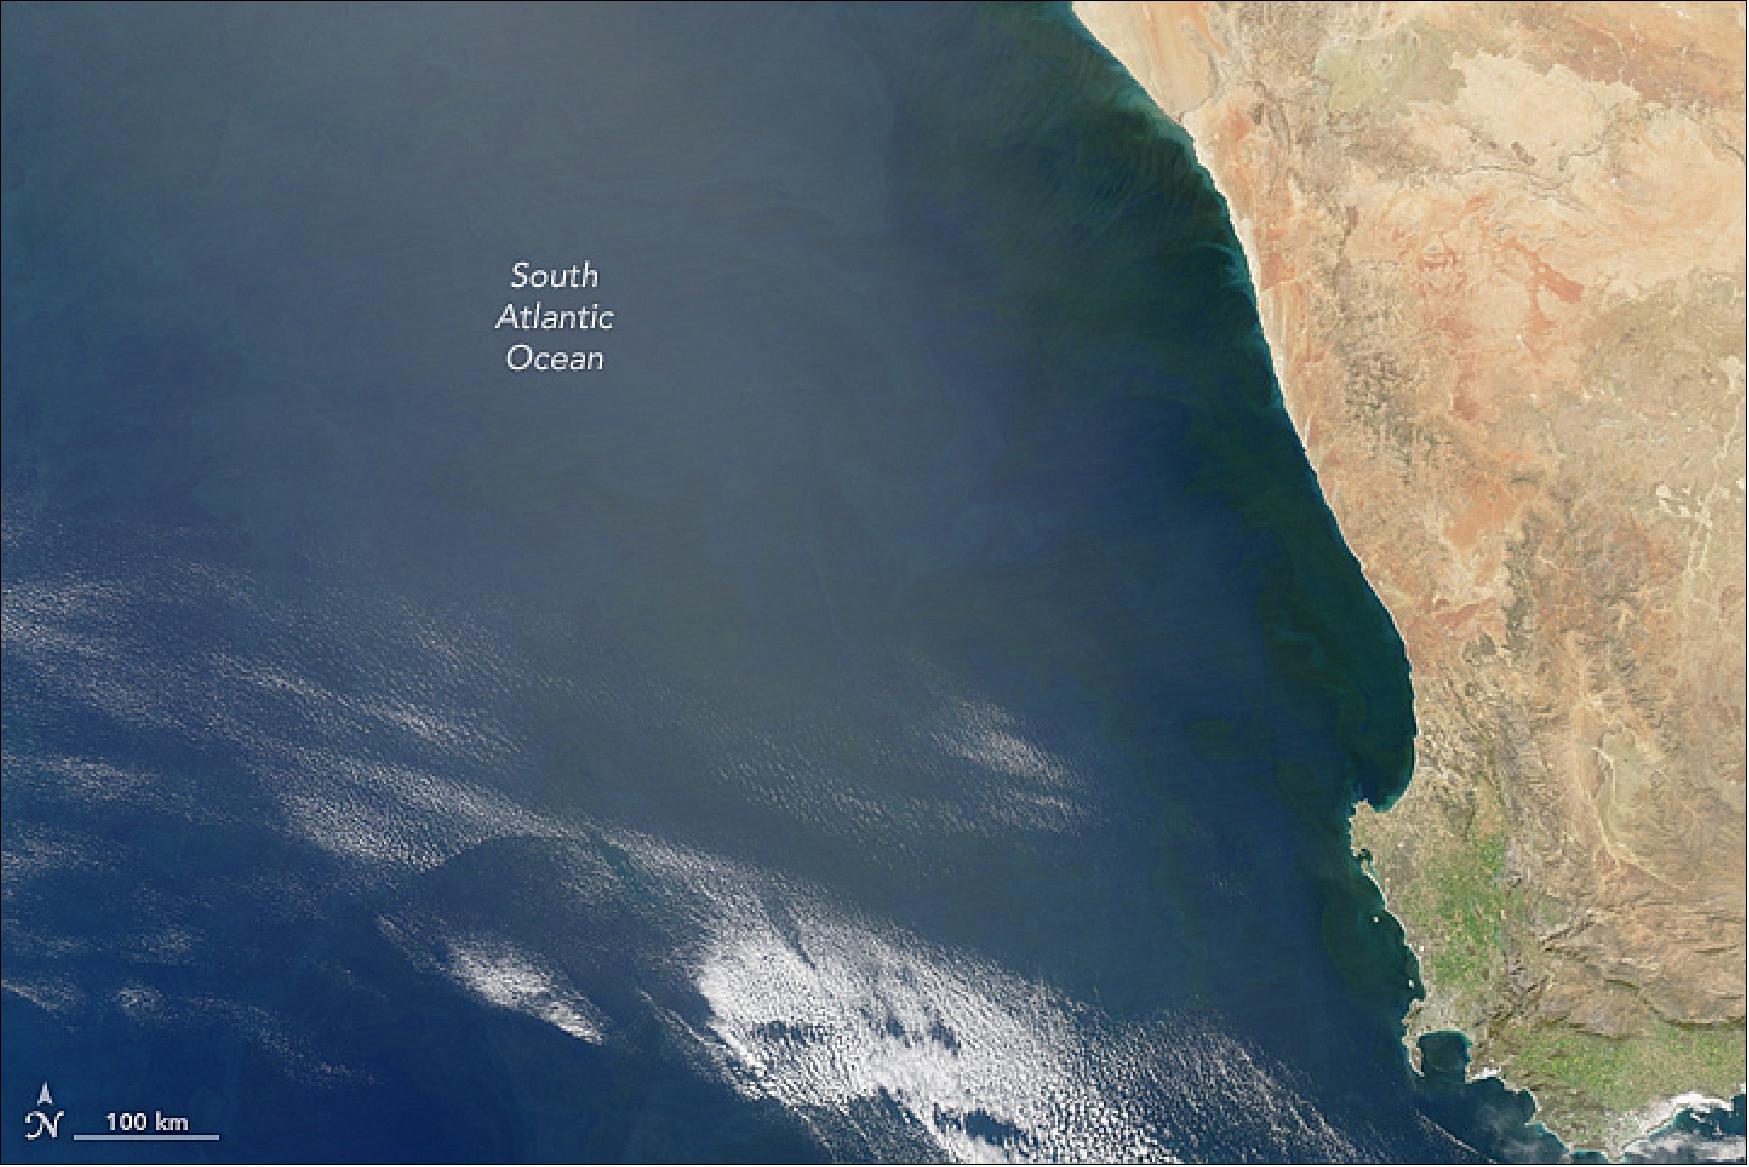 Figure 91: MODIS image of the south-west coast of Africa and the South Atlantic Ocean acquired on 2 September 2017 (image credit: NASA Earth Observatory, images by Jesse Allen, using data from the Level 1 and LAADS (Atmospheres Active Distribution System), and ocean imagery by Norman Kuring, NASA’s Ocean Color web, story by Mike Carlowicz)